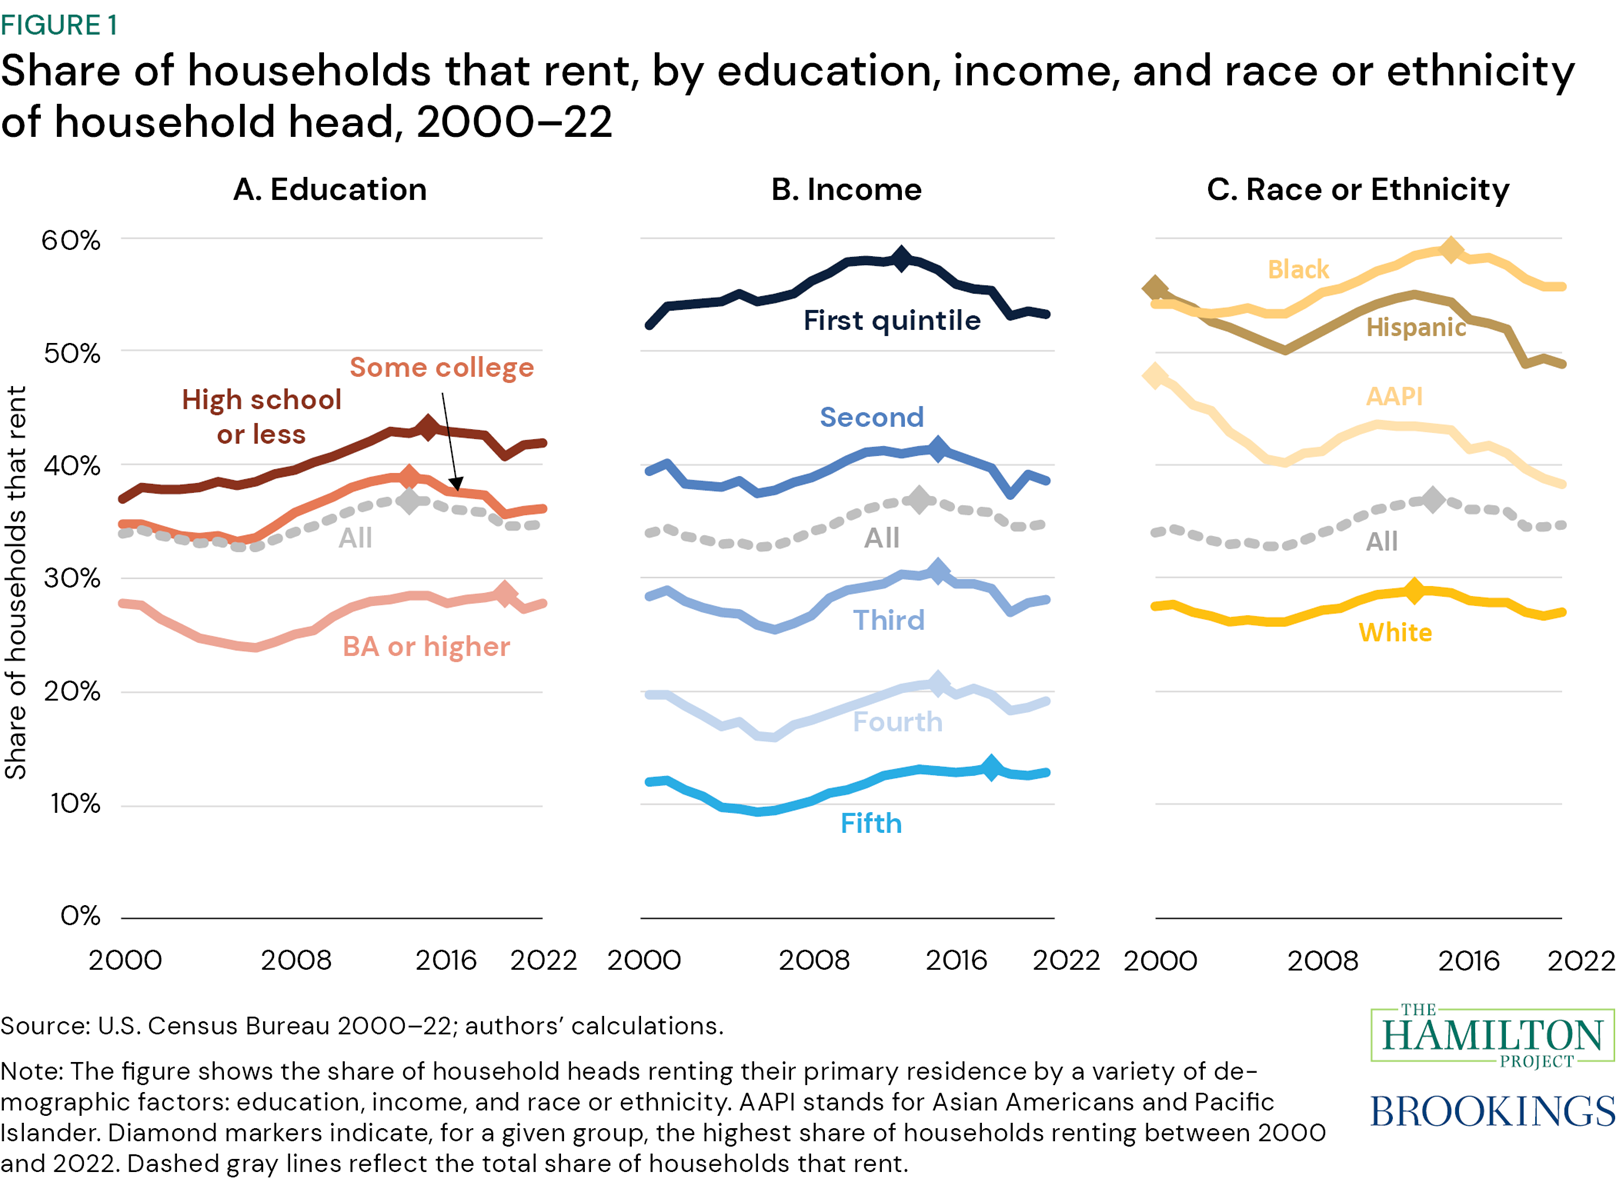 Figure 1: Share of households that rent, by education, income, and race or ethnicity of household head, 2000–22. Figure 1 shows the share of renting households from 2000 to 2022 by the household head’s education, income, and race or ethnicity. The share of households that rent and that are headed by someone who does not have a college degree (panel A), who has lower income (panel B), or who is Black (panel C) has consistently exceeded the overall share of renting households (Crump and Schuetz 2021). In 2022, 35 percent of all households were renters.